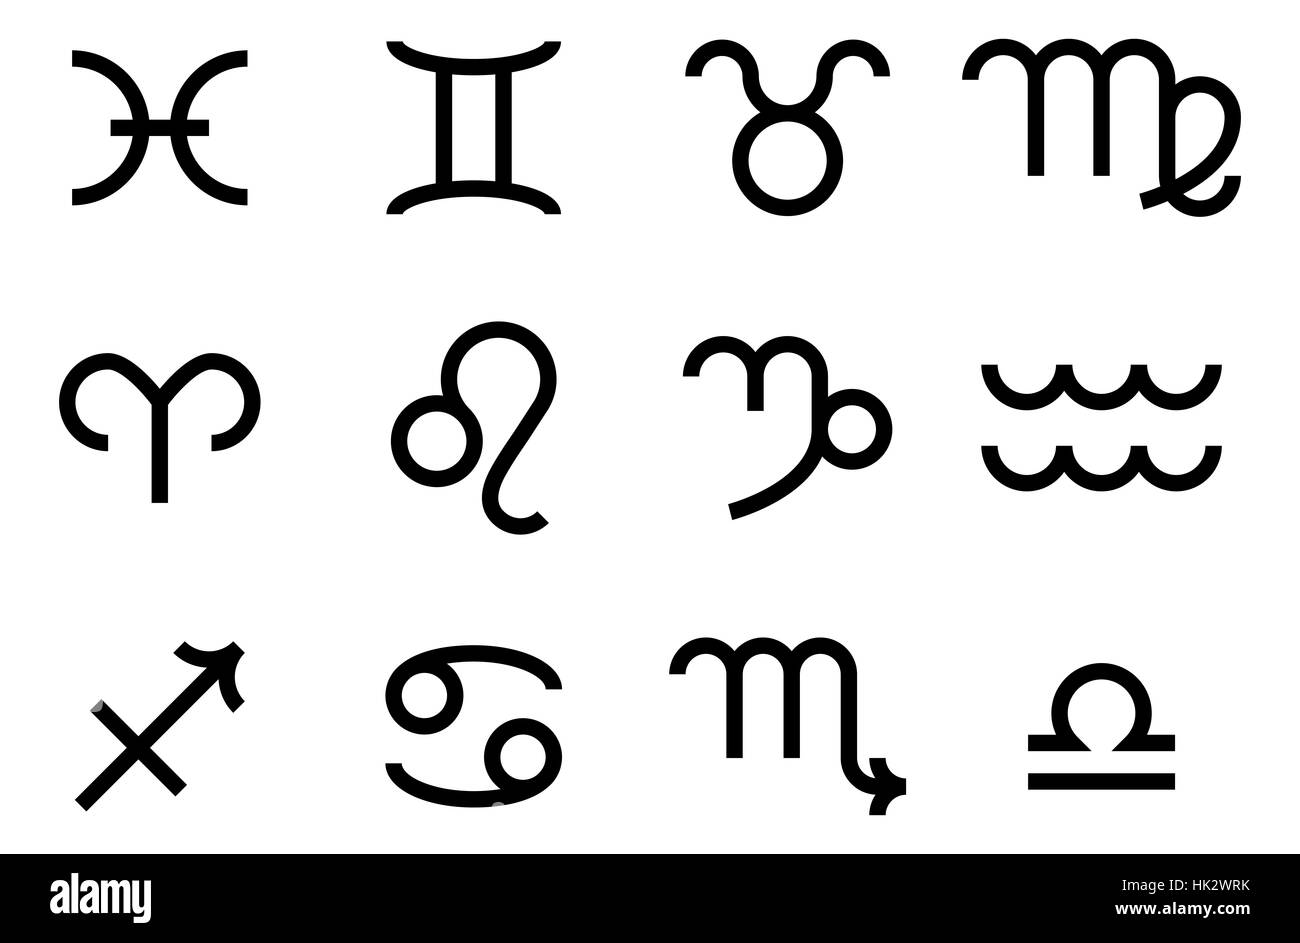 A set of zodiac sign icons representing the twelve signs of the zodiac ...